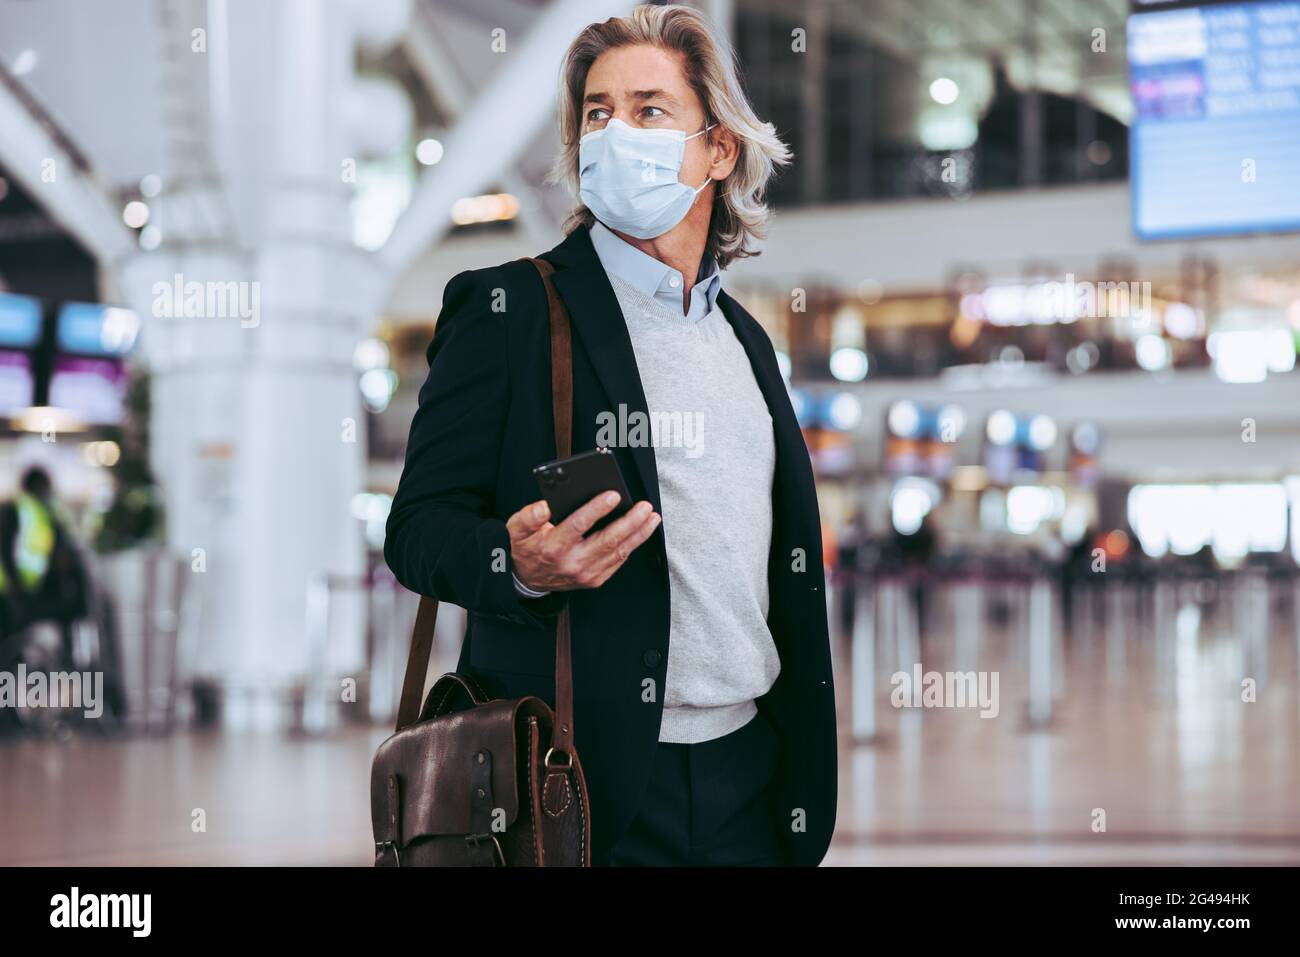 Man wearing facemask with handbag and mobile phone on airport. Male business traveler in transit area at an international airport. Stock Photo